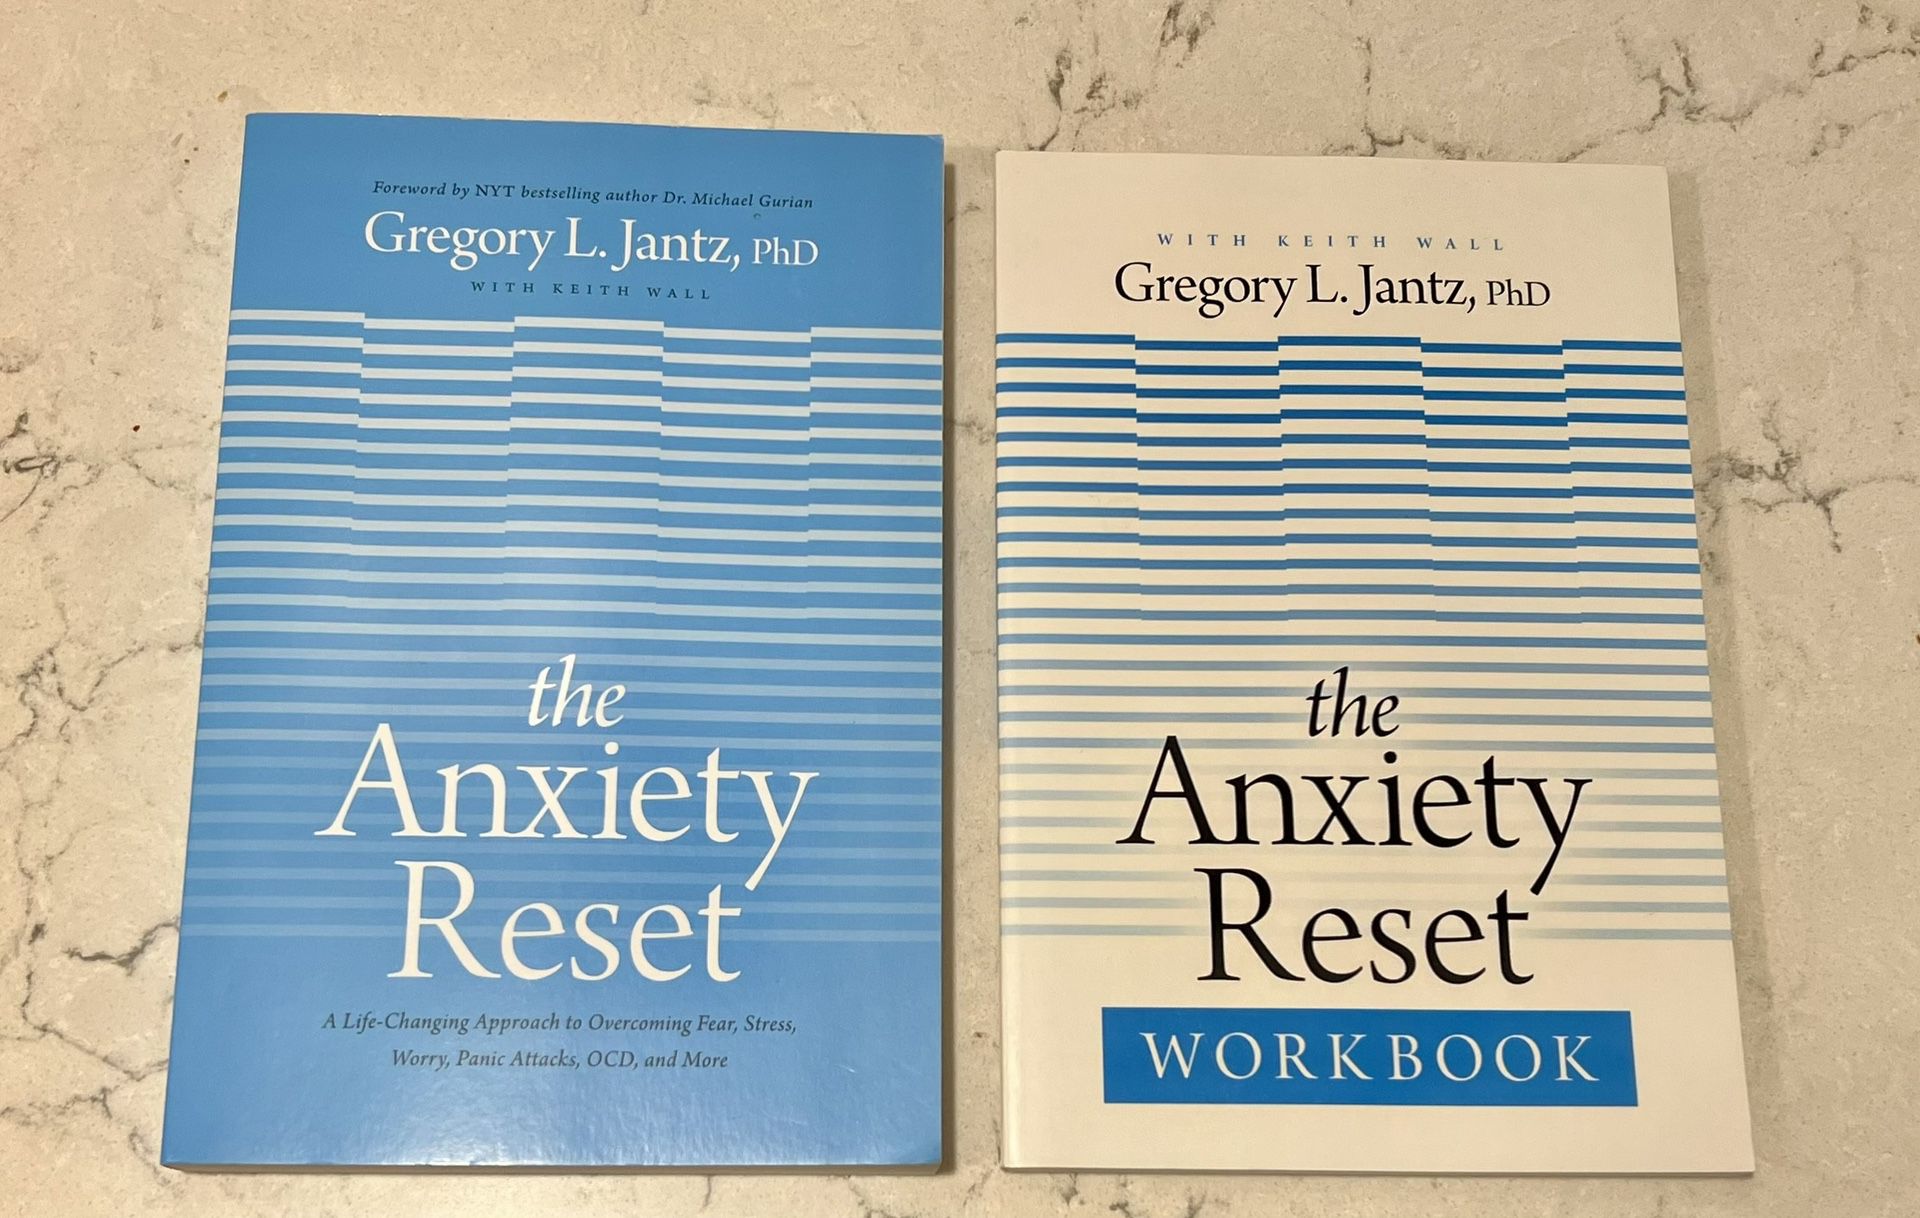 New The Anxiety Reset book and workbook by Gregory Jantz